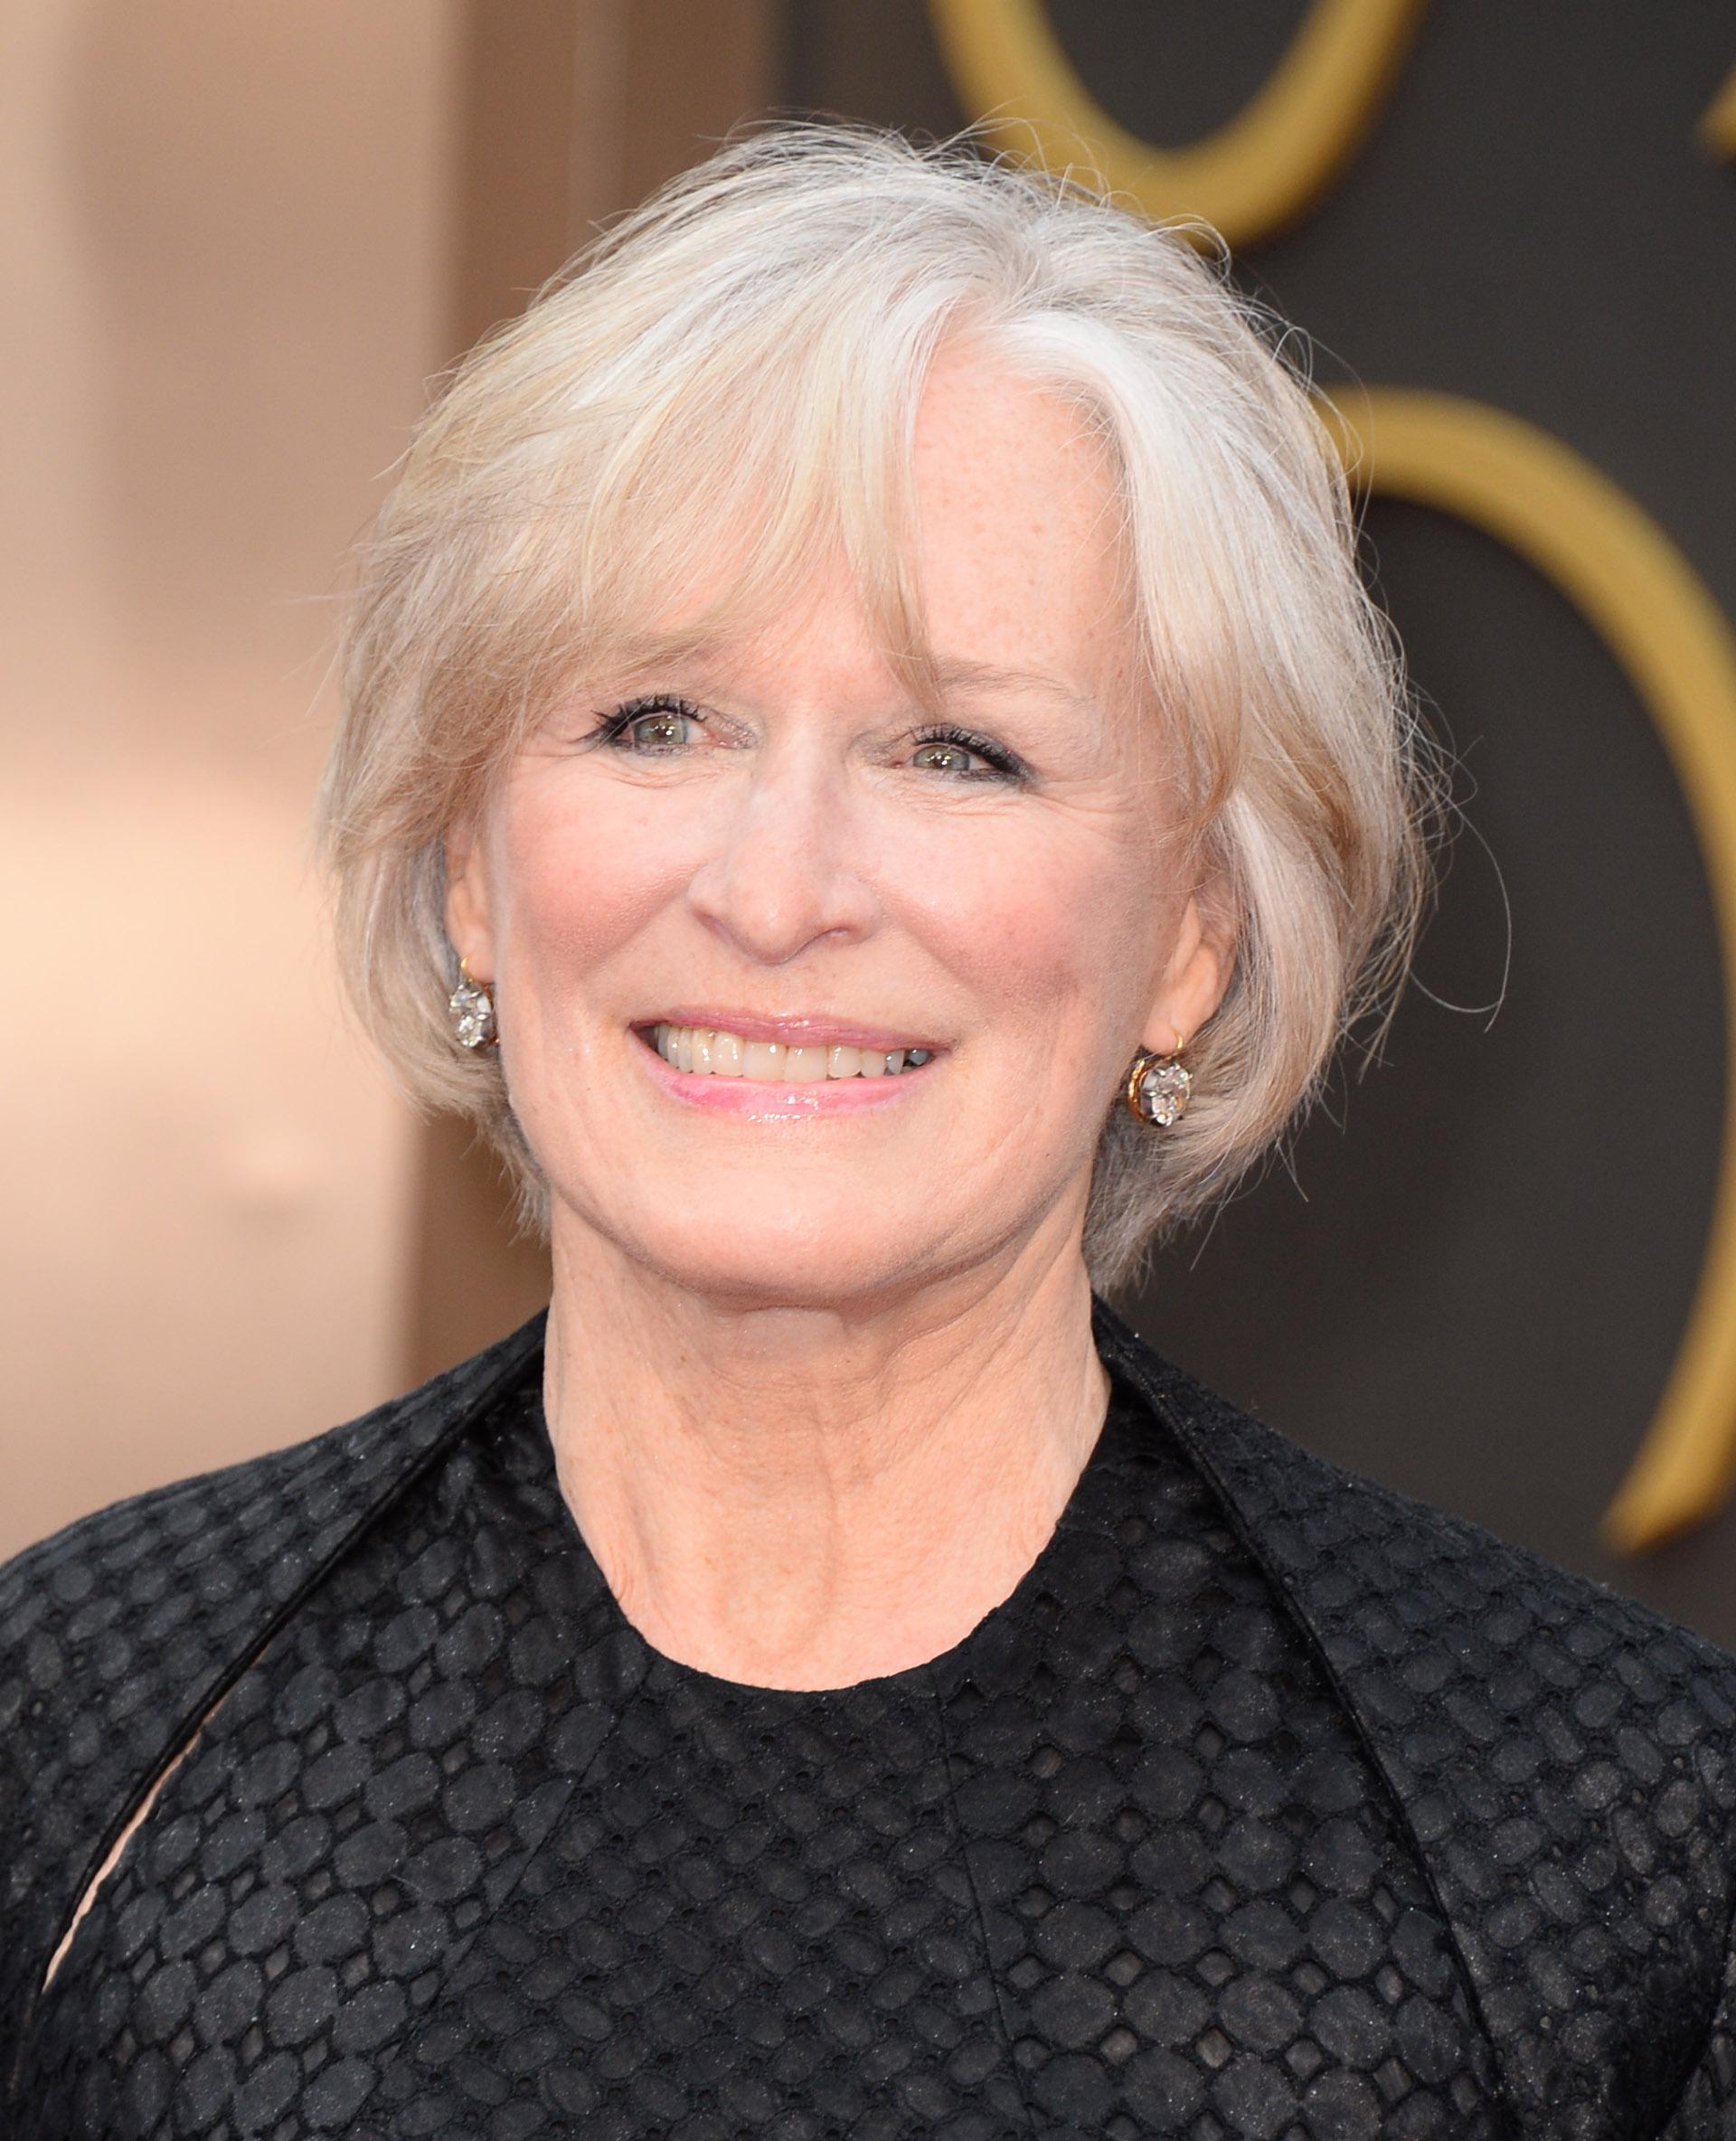 Pictures of Glenn Close.